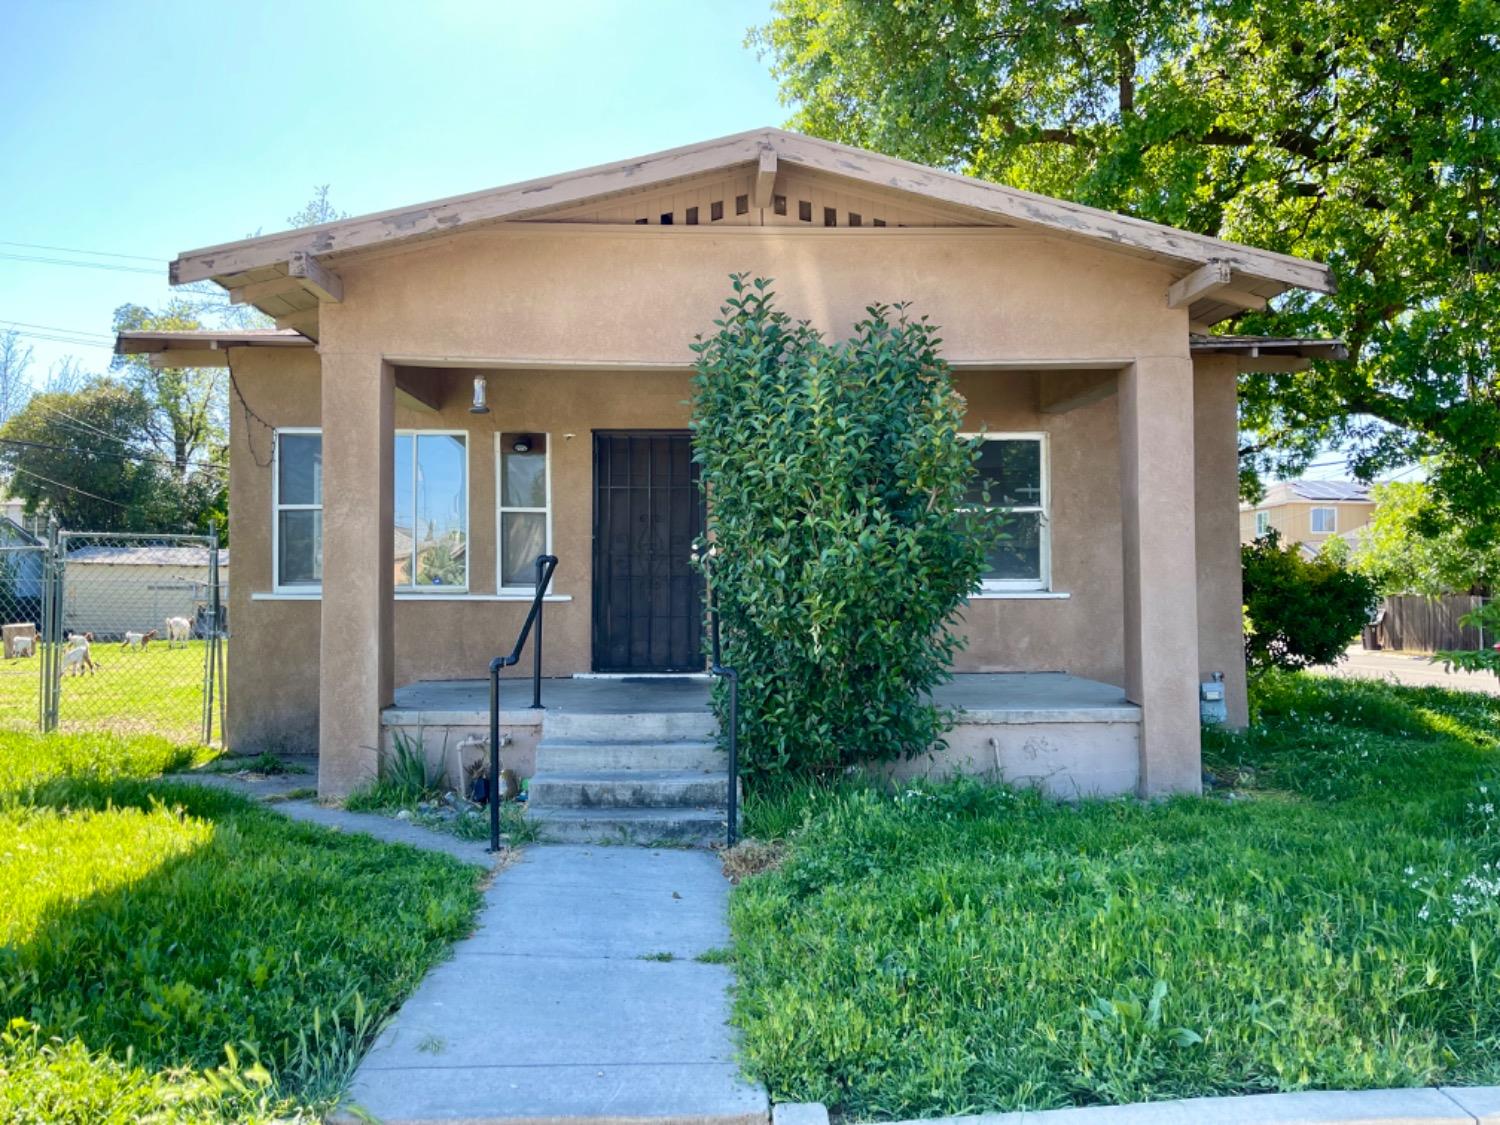 Photo of 1615 Palm Ave in Stockton, CA